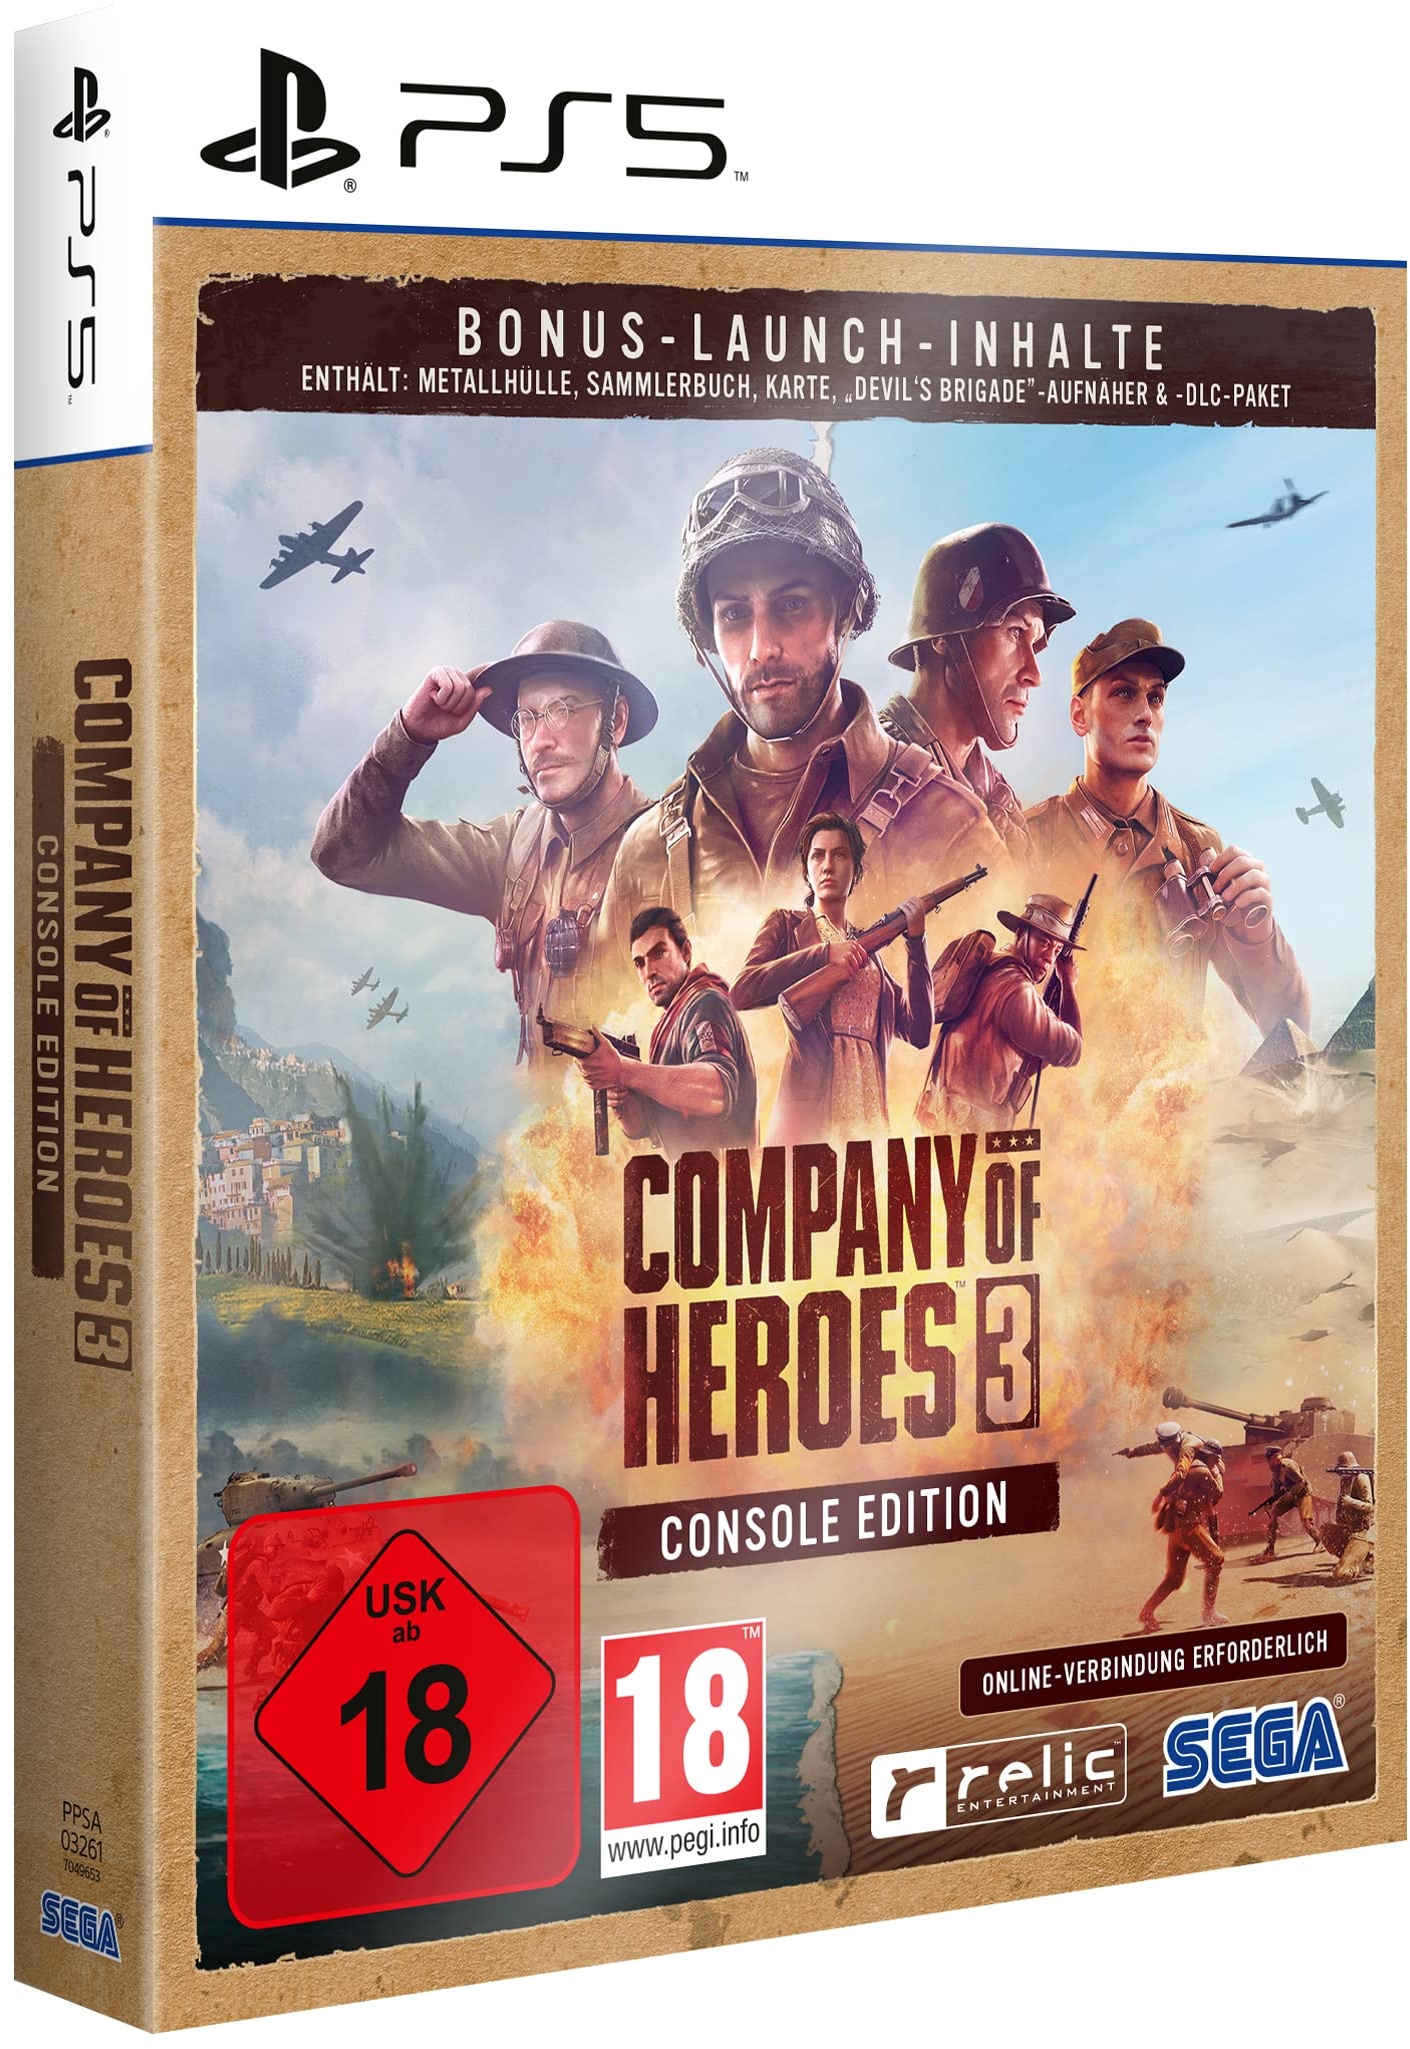 Company of Heroes 3 Launch Edition (Metal Case) (PlayStation 5)